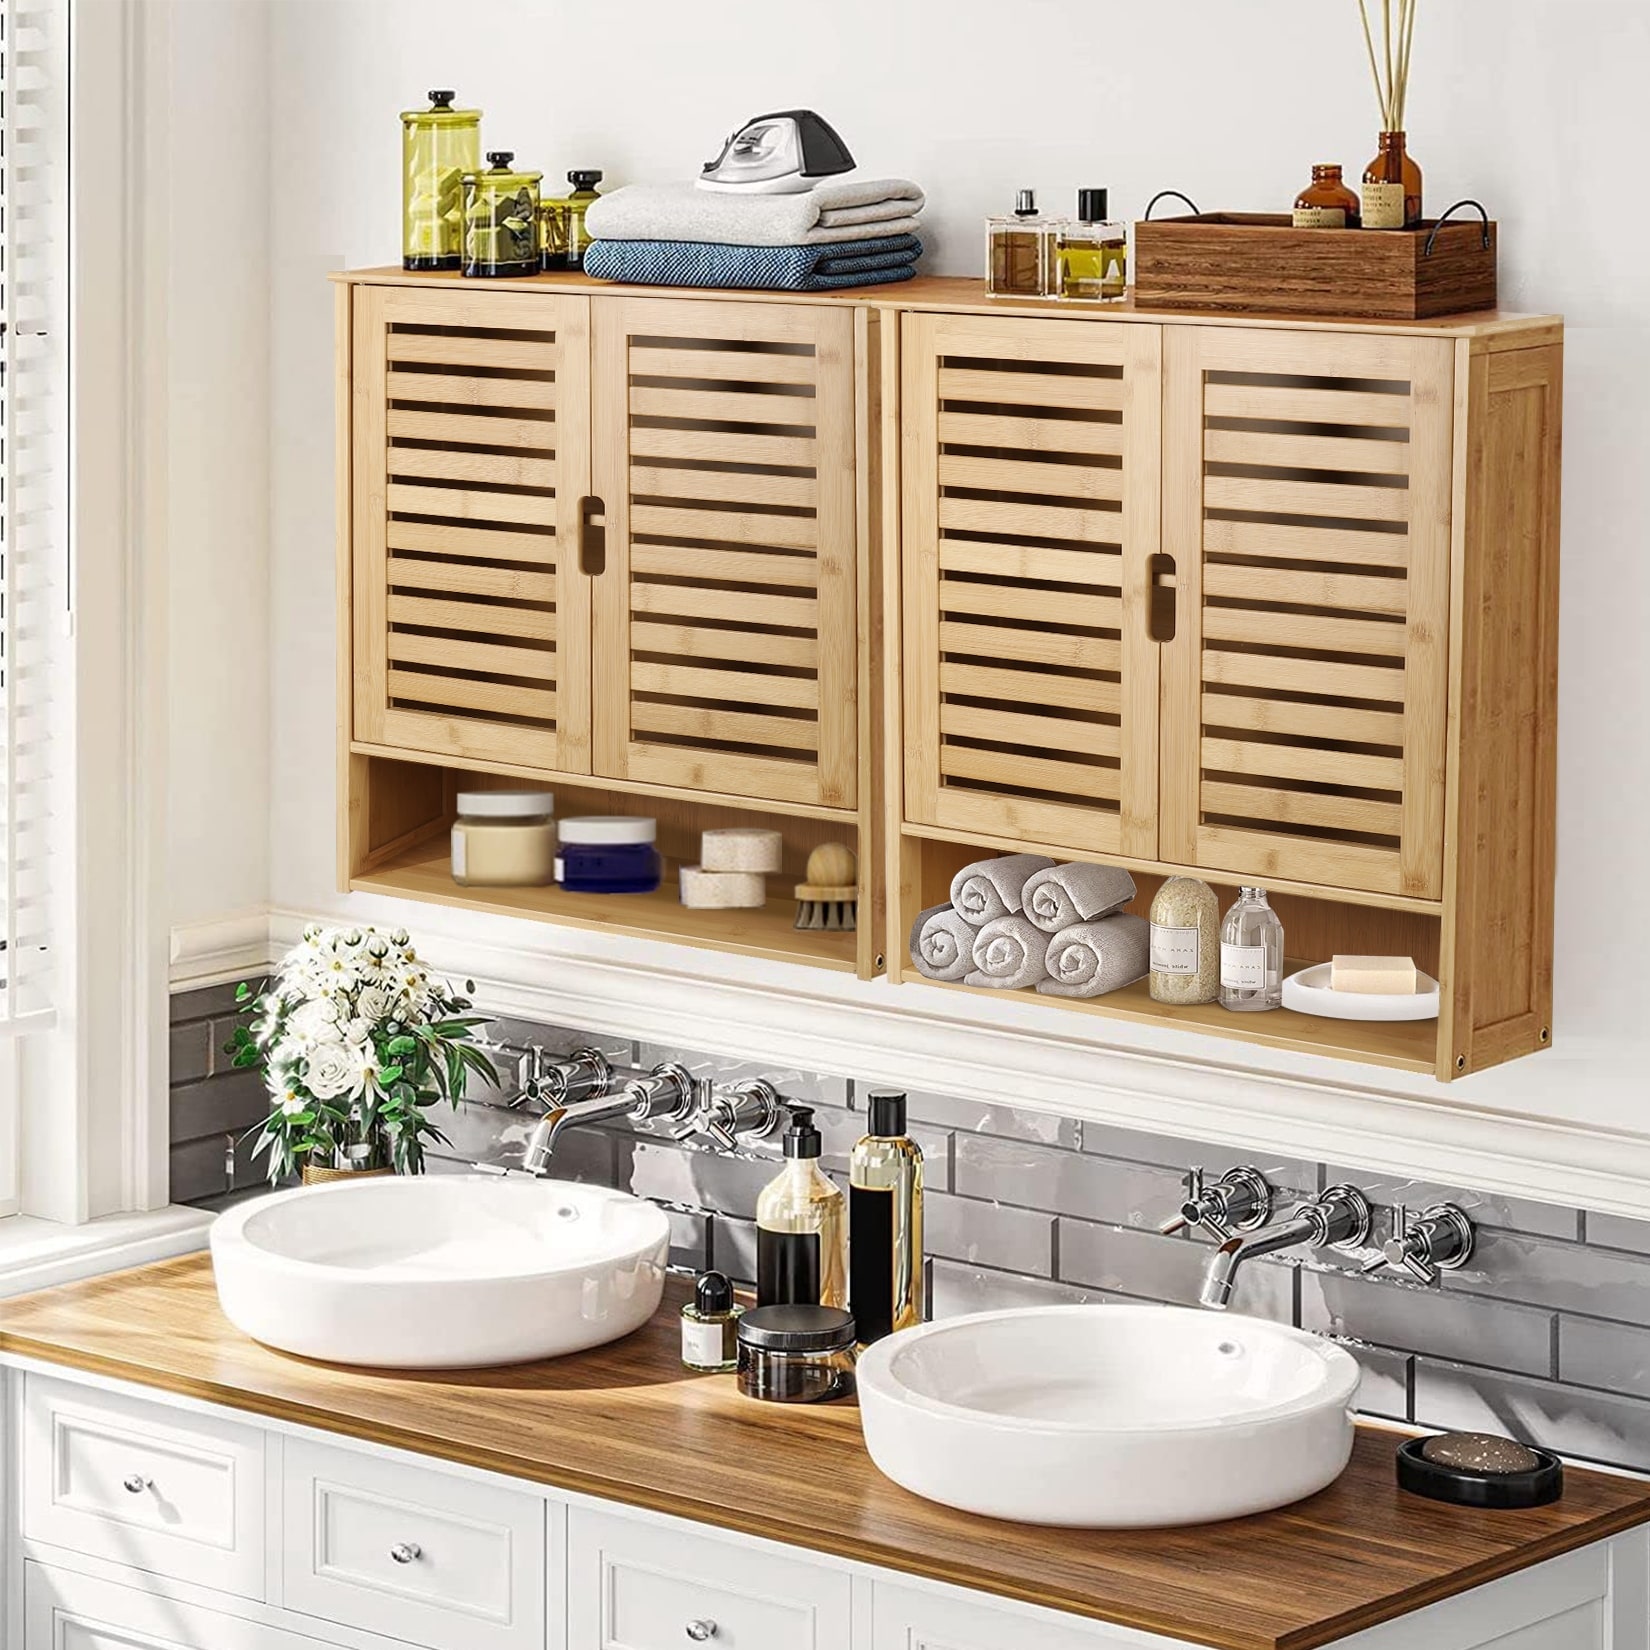 https://ak1.ostkcdn.com/images/products/is/images/direct/1ab0639340ed19d61efb321d78dc06206eb42be0/Bamboo-Over-The-Toilet-Sink-Storage-Cabinet-Bathroom-Organizer.jpg